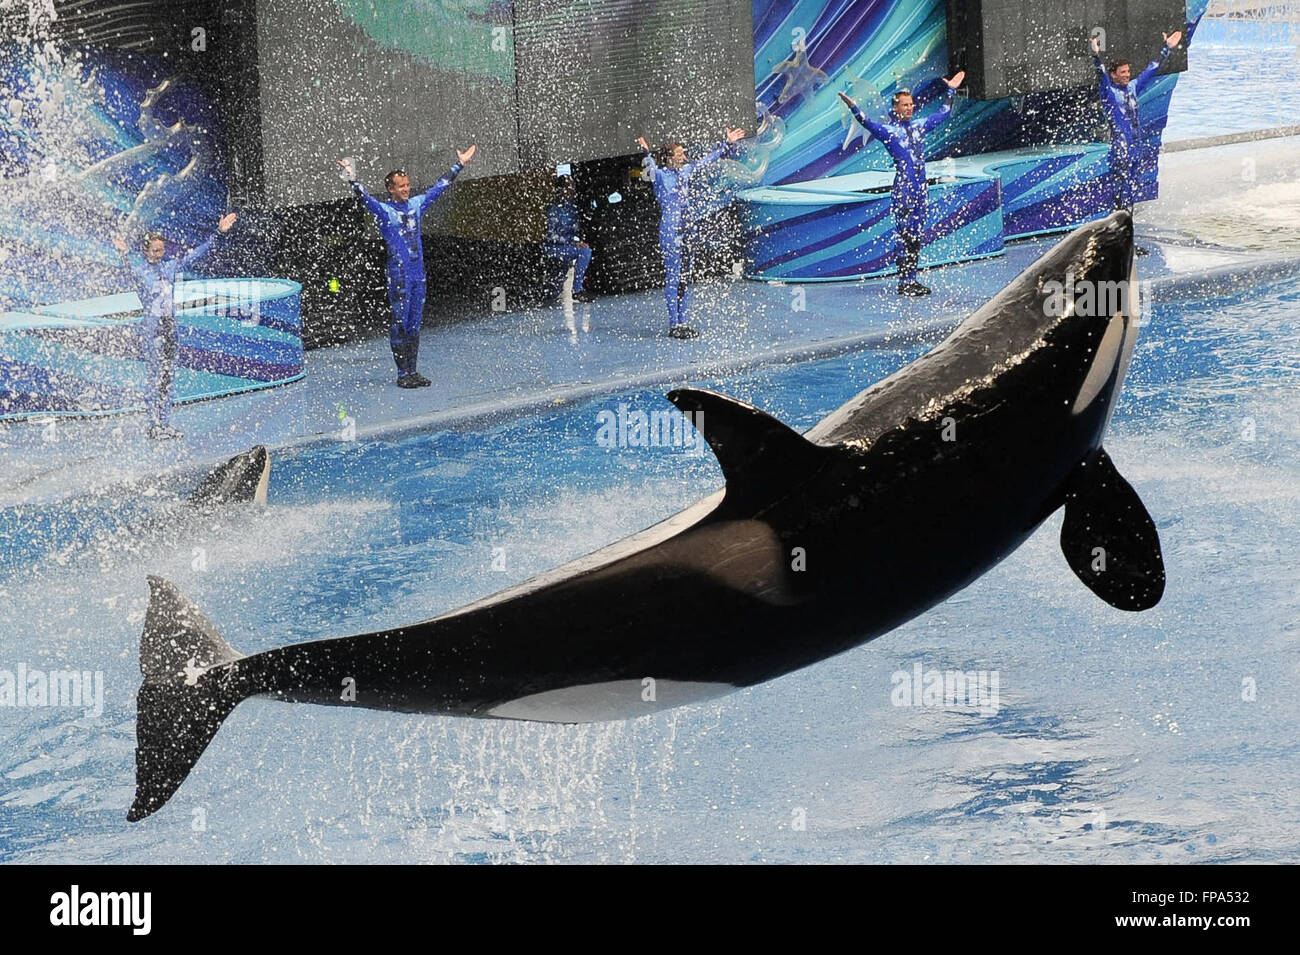 Seaworld Orlando - killer whale / orca leaps out of the water at the Orlando Florida Sea World in front of the whale trainers FILE PIC': 14th Augst, 2013 Credit:  Don Mennig/Alamy Live News Stock Photo